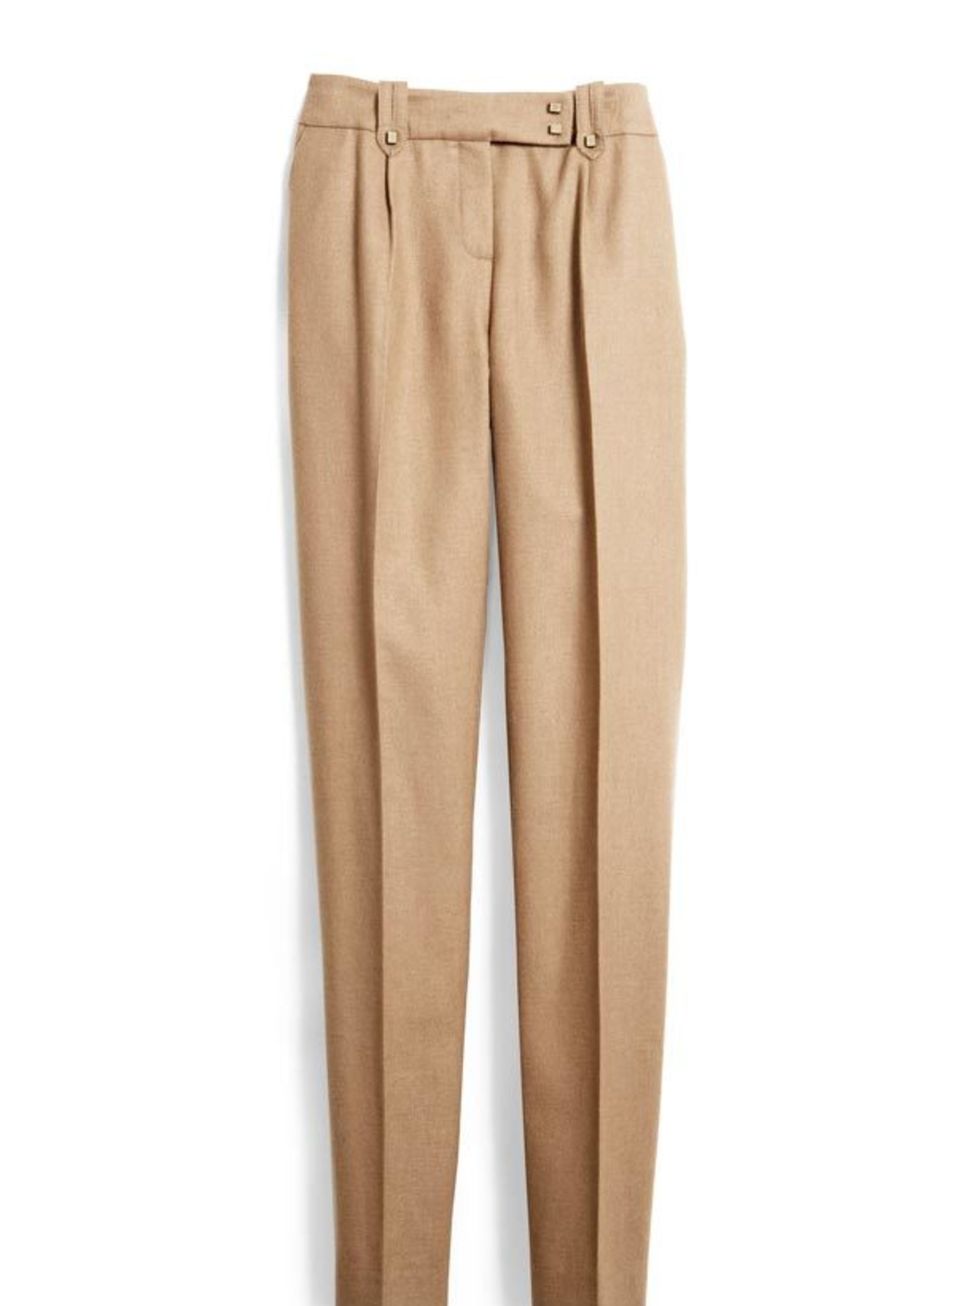 <p>Hobbs camel trousers, £159, available from <a href="http://www.hobbs.co.uk">www.hobbs.co.uk</a></p>